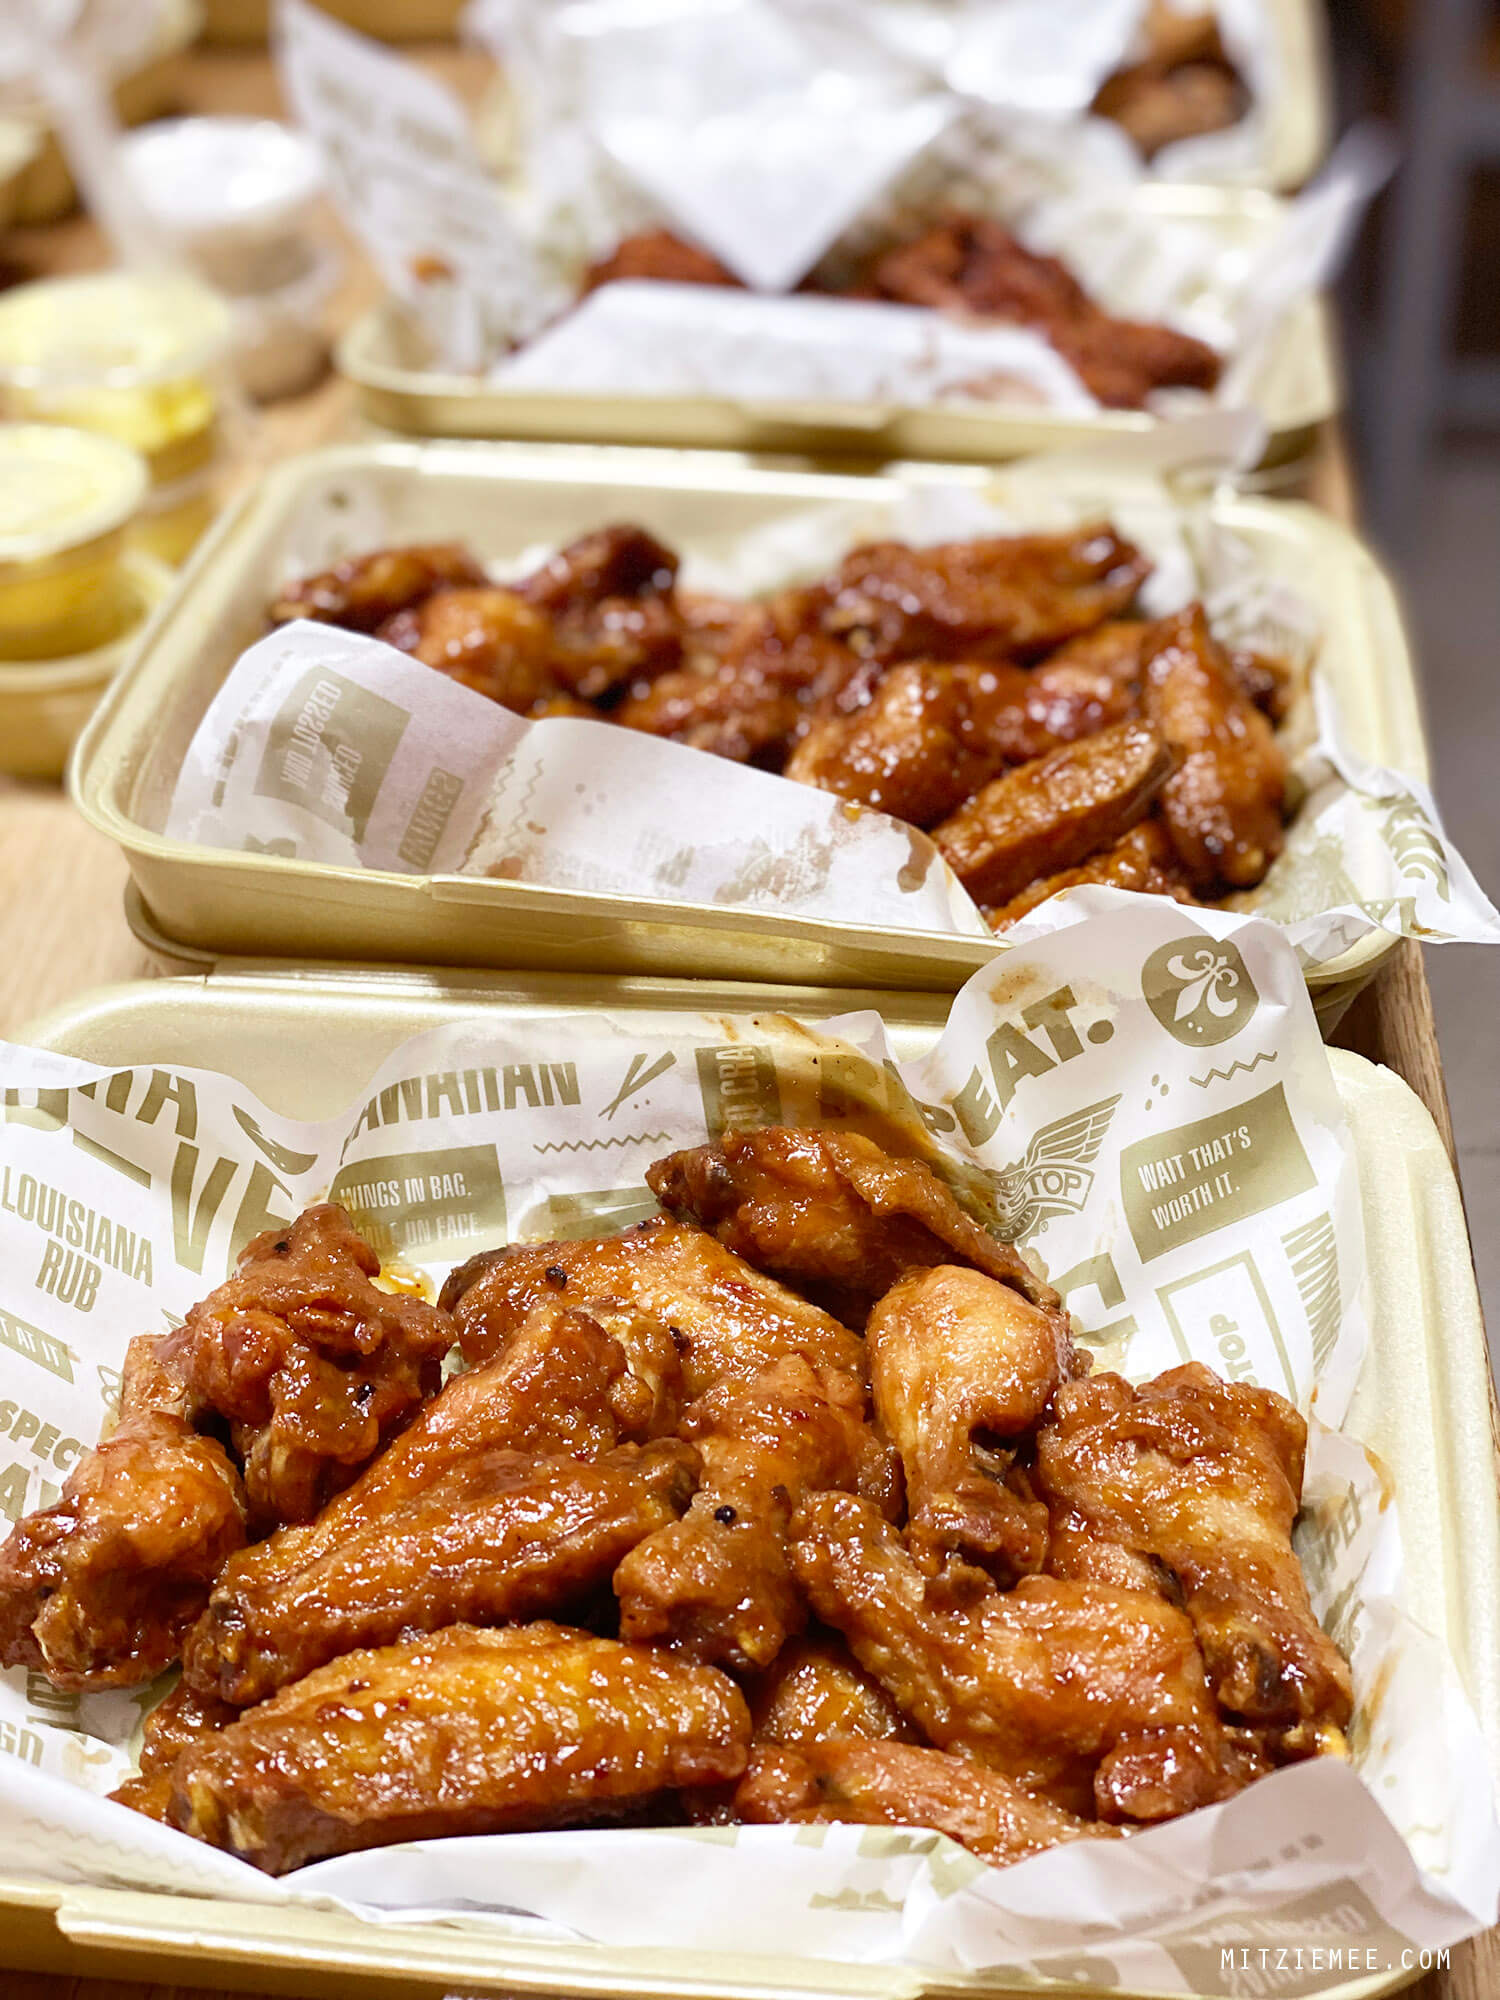 Takeout from Wingstop, Dubai